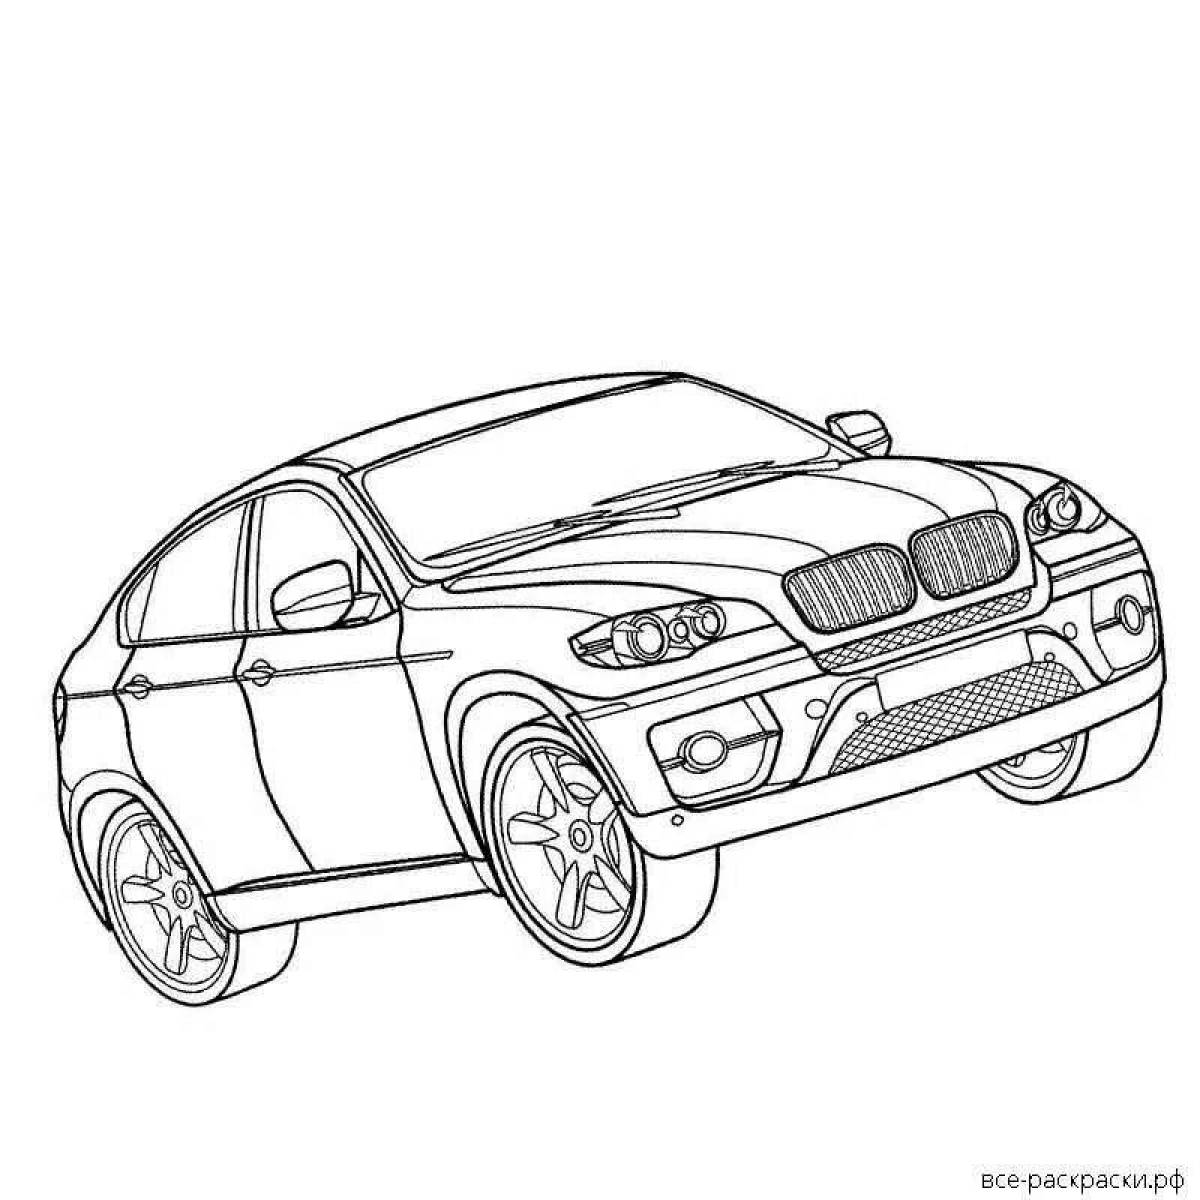 Coloring majestic bmw x6